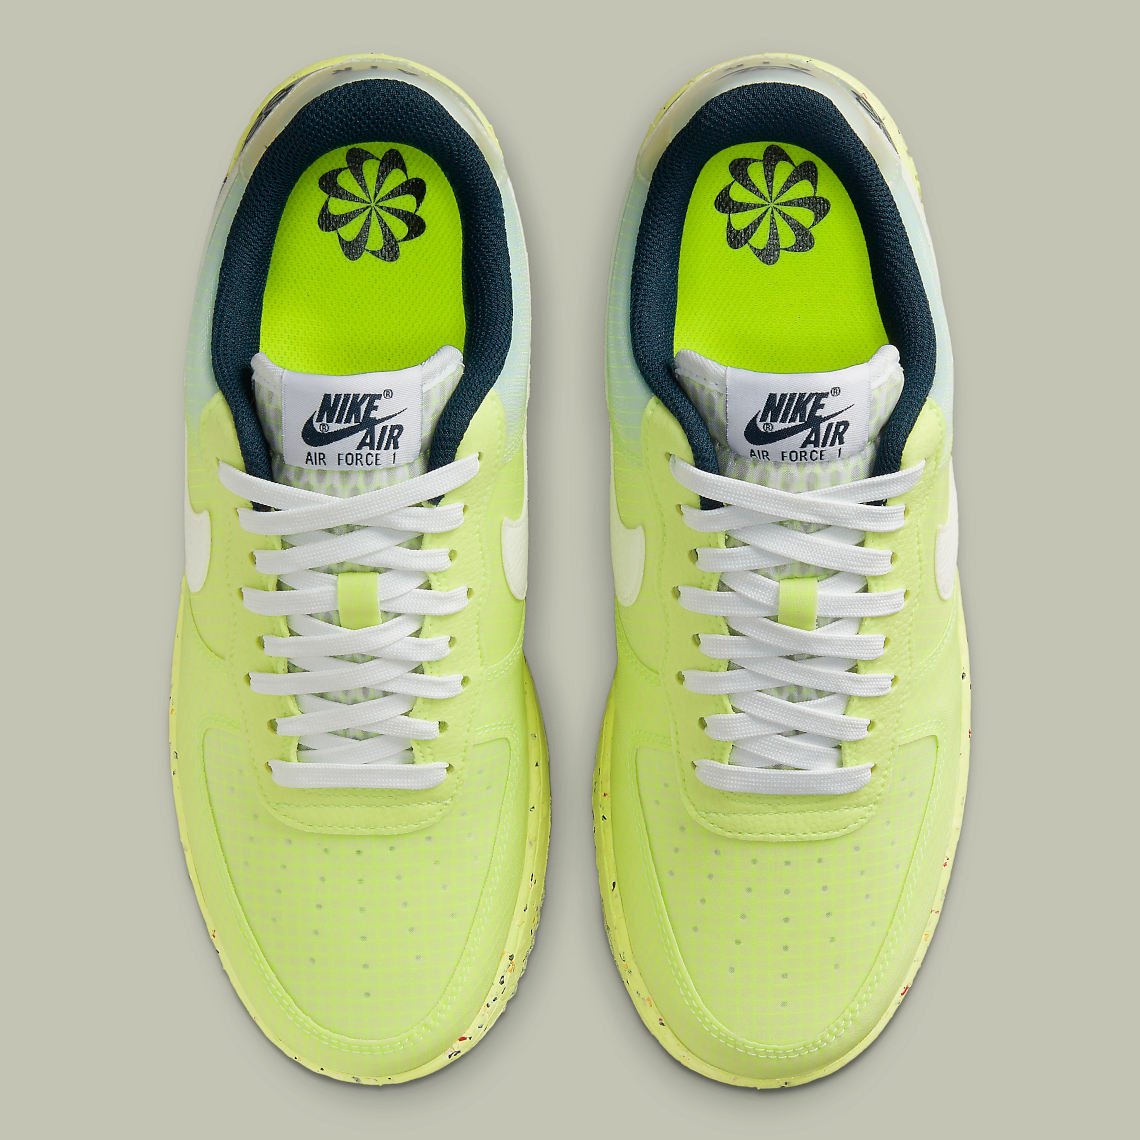 Nike Air Force 1 Crater Dh2521 700 1